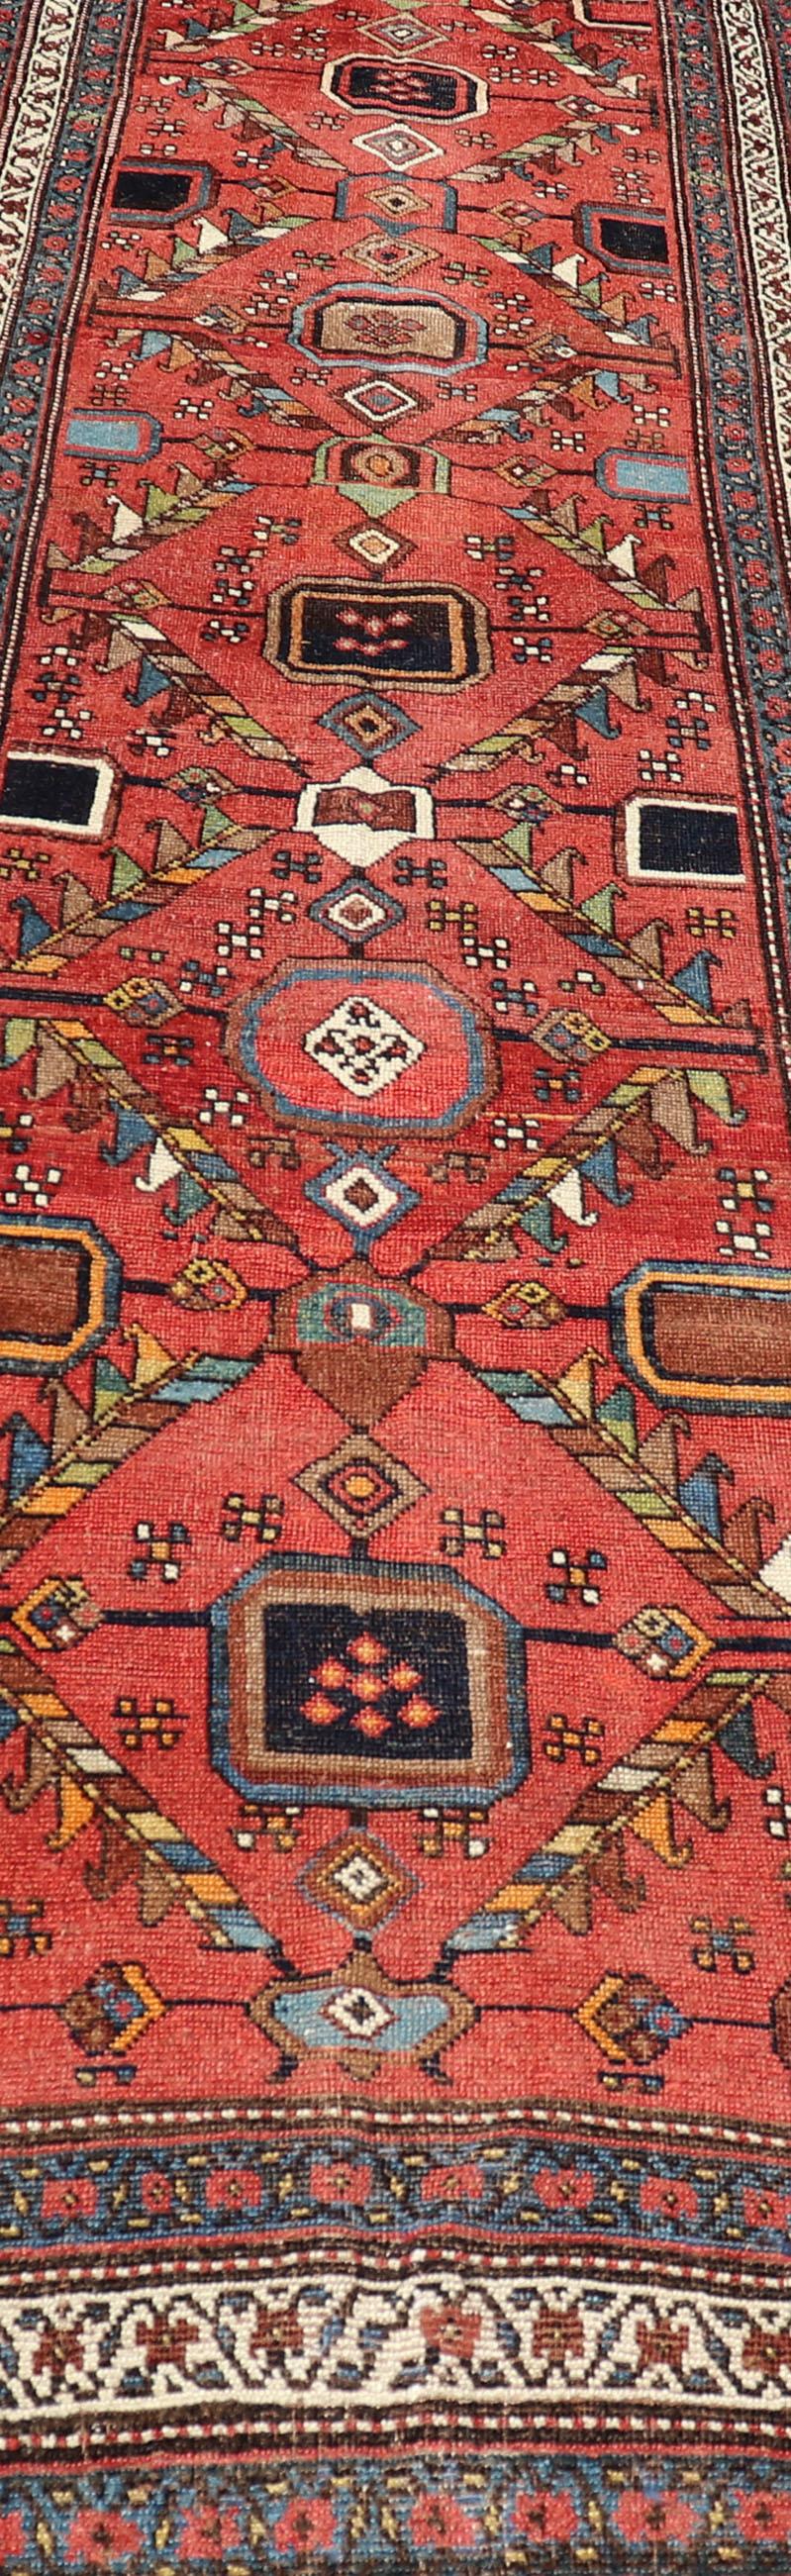 This early 20th century antique Kurdish runner features a triple-lined floral border, emboldening an ivory stripe between two blue edges. The field features a tribal, Sub-geometric pattern in a true red, accented by earthy tones in olive, ivory,